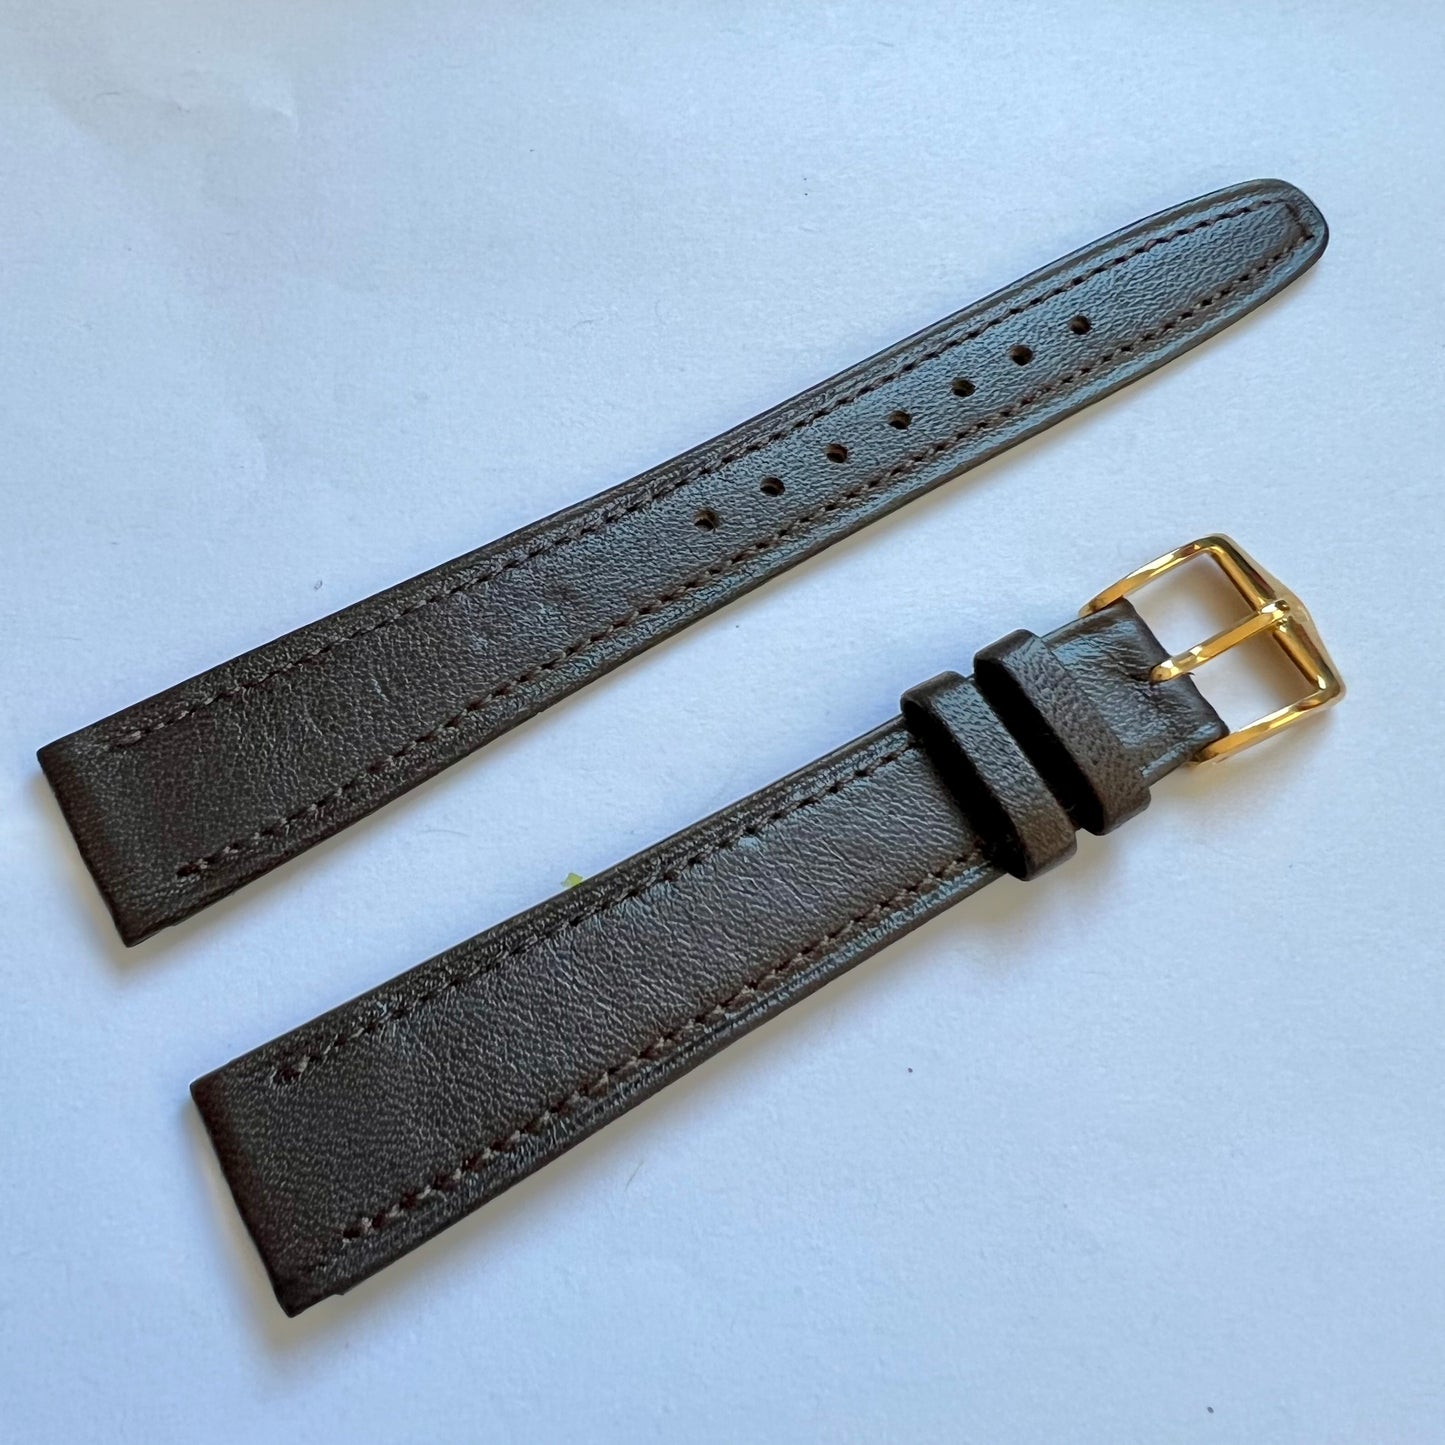 New OMEGA 15/12mm Brown Genuine Leather Strap Band + Gold Tone Buckle